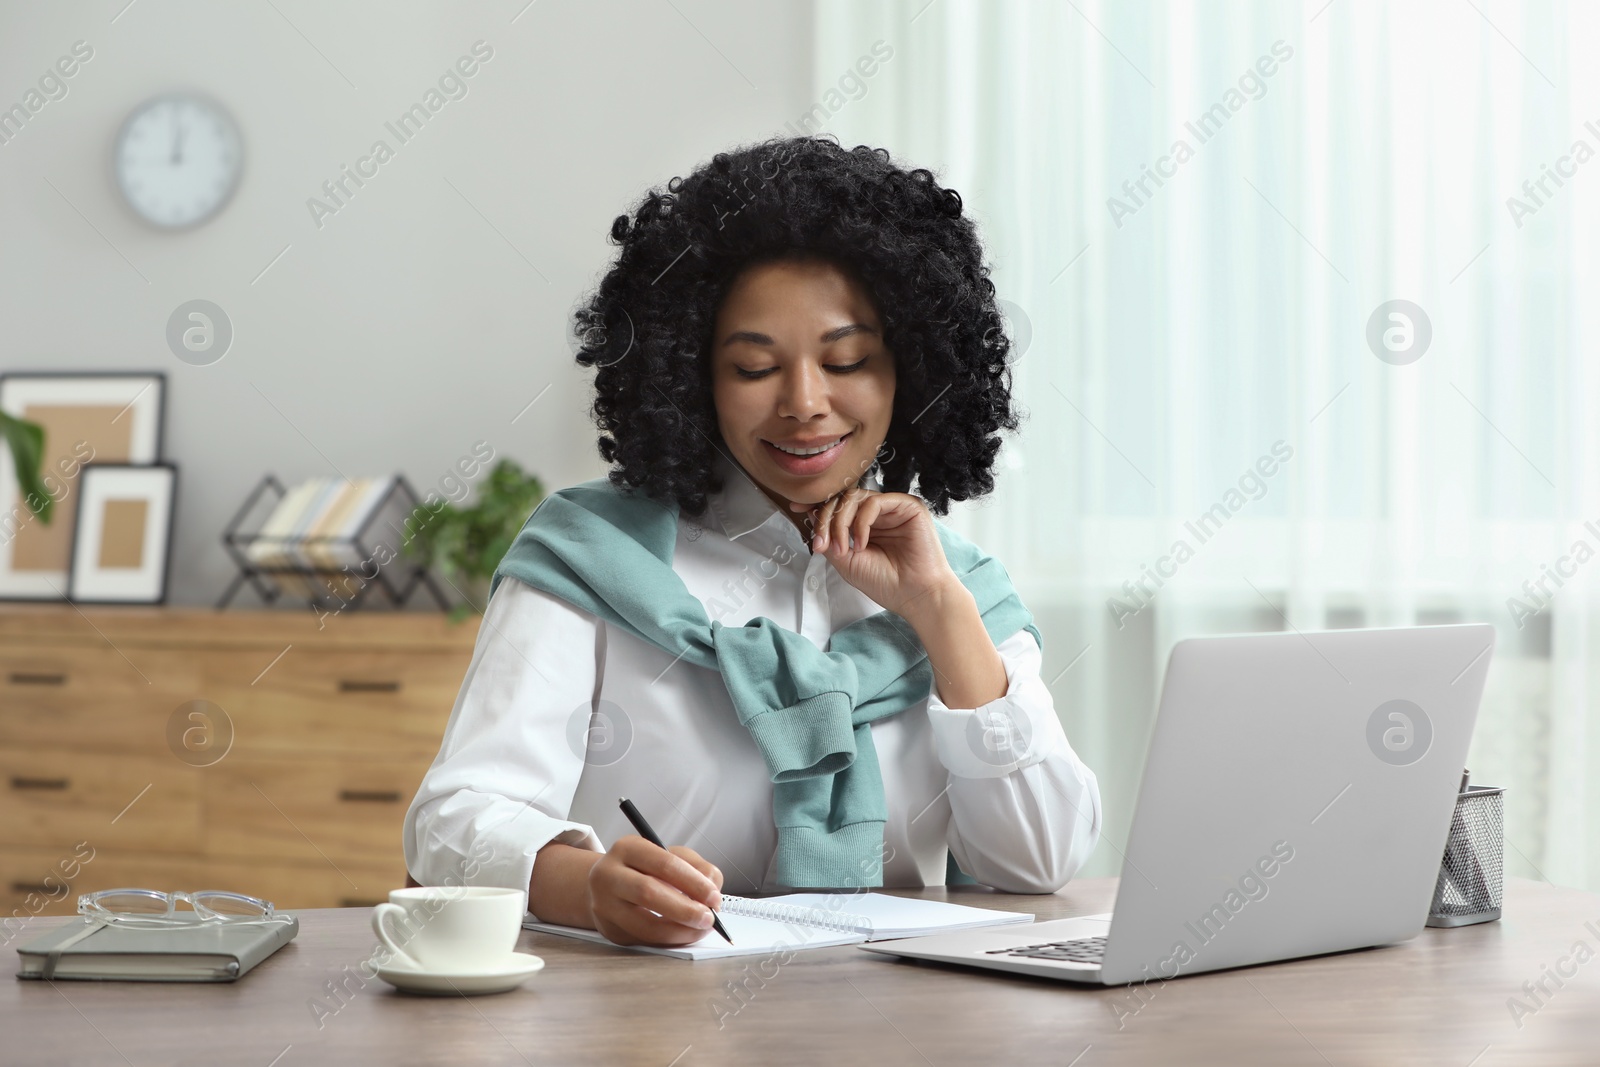 Photo of Happy young woman writing notes while using laptop at wooden desk indoors